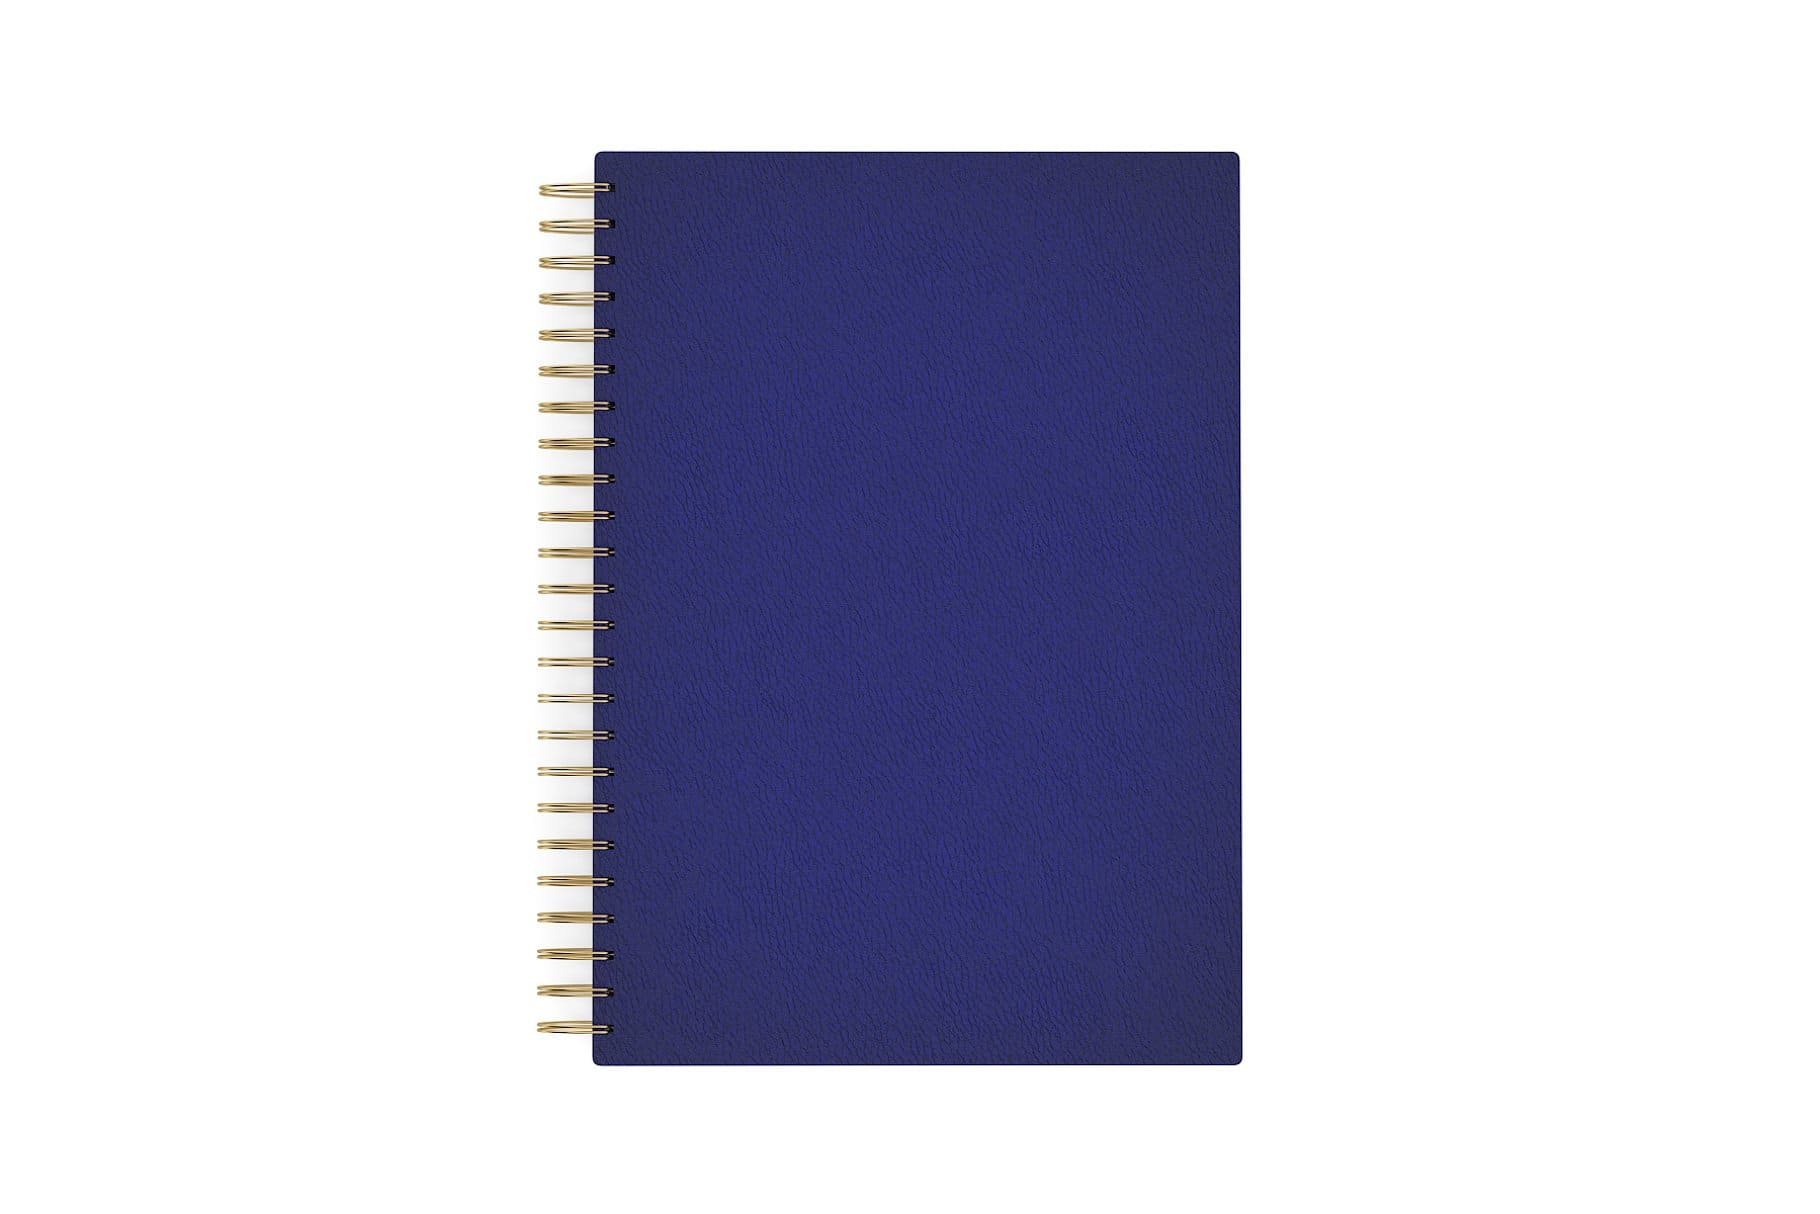 A blue notebook with a spring is depicted on a white background.